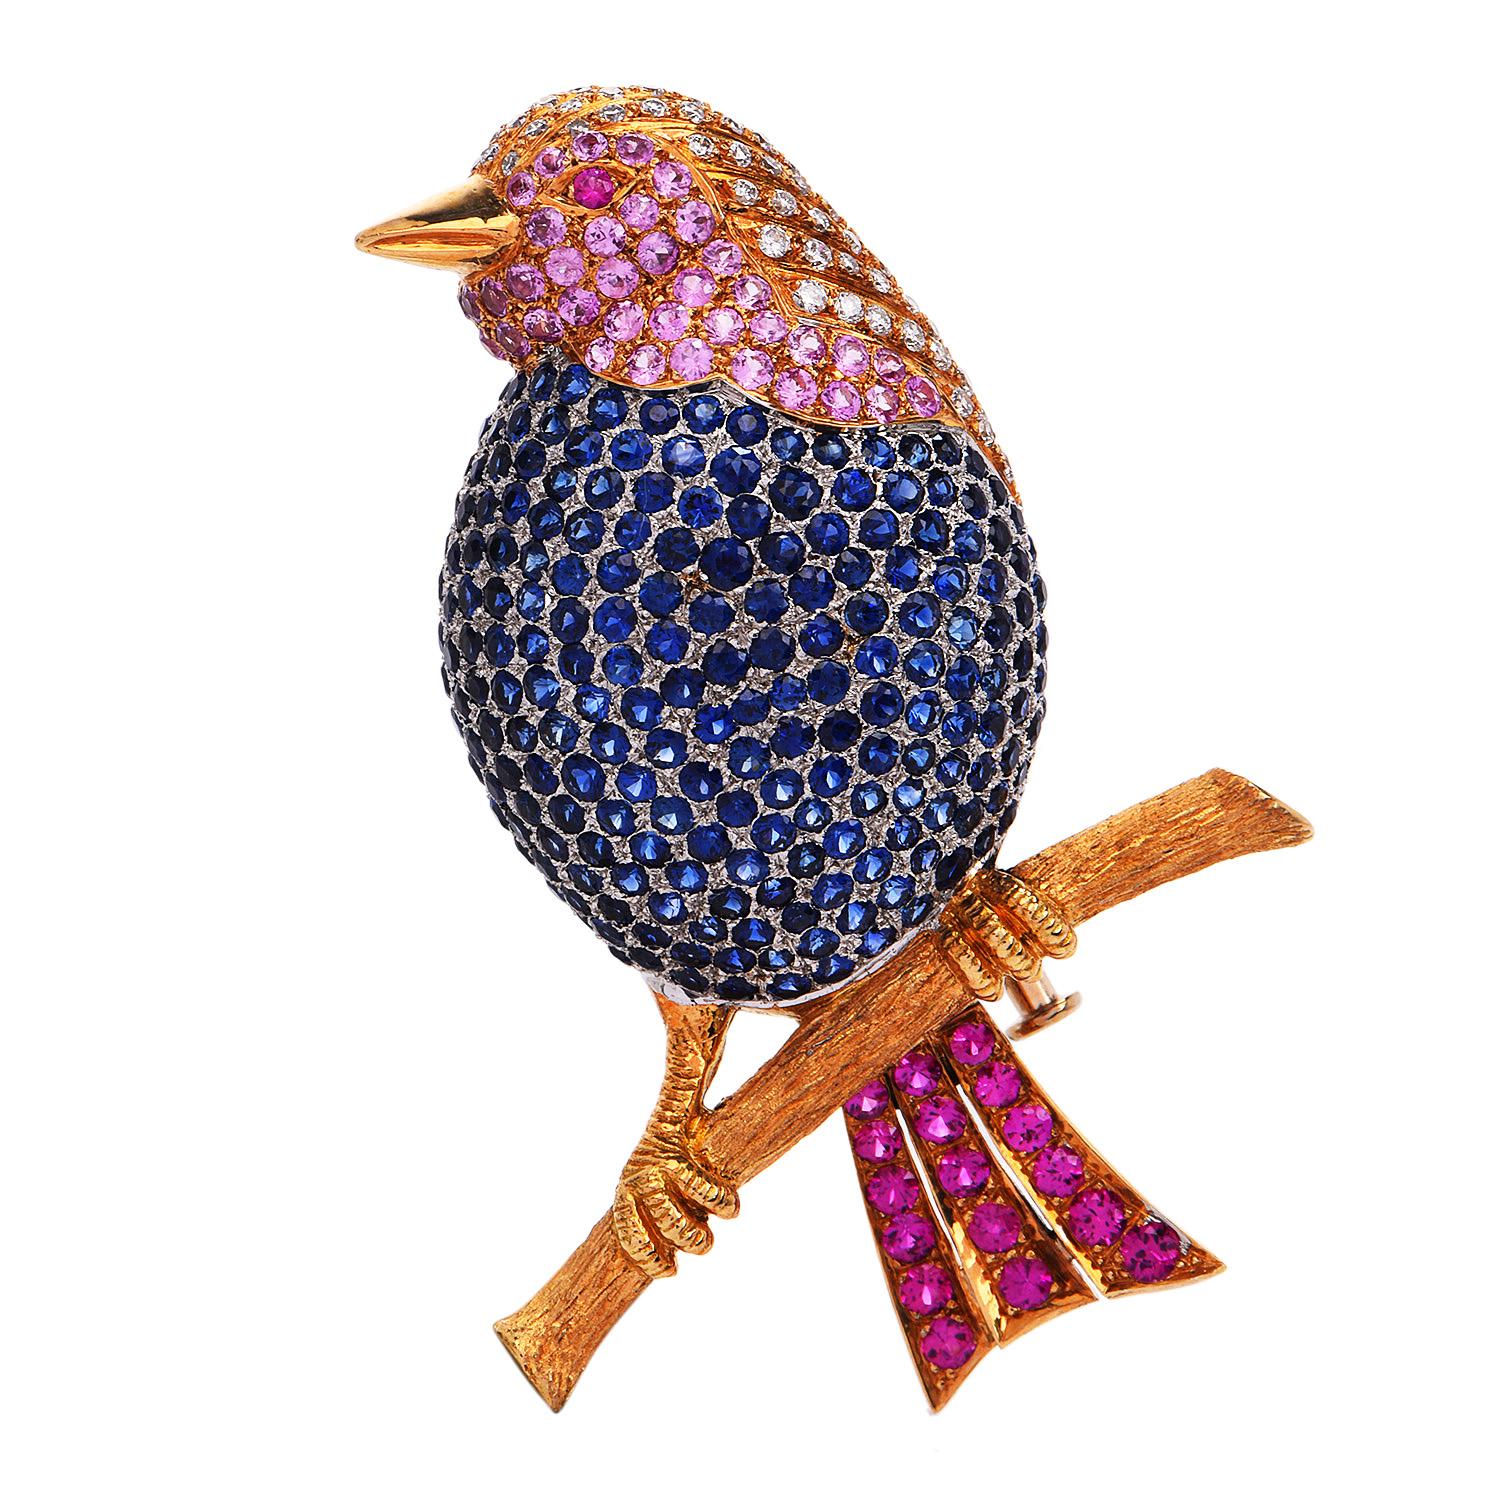 This stunning Vintage songbird pin is crafted in solid 18K yellow and white gold.

Its crest is elaborated with 53 genuine pave set round fancy natural diamonds approx. 0.50 carats, and G-H color, VS clarity. 

The body of the bird is finely crafted